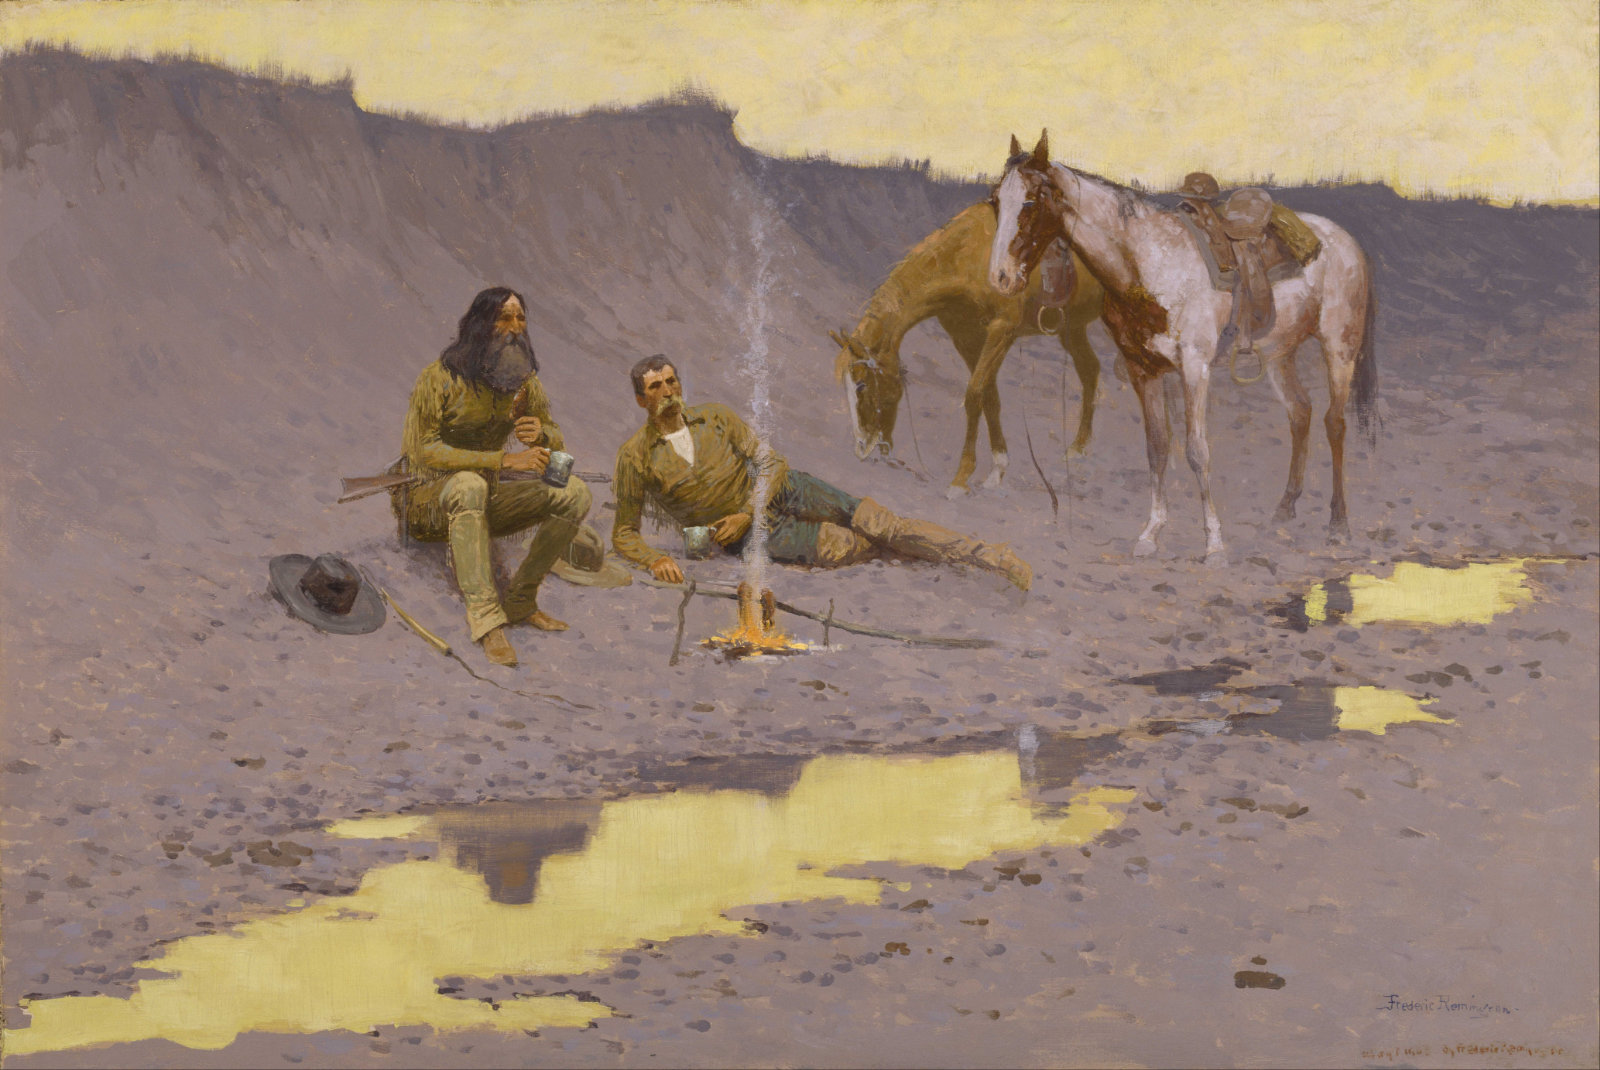 A painting by Frederic Remington of two cowboys and their horses at a small fire.